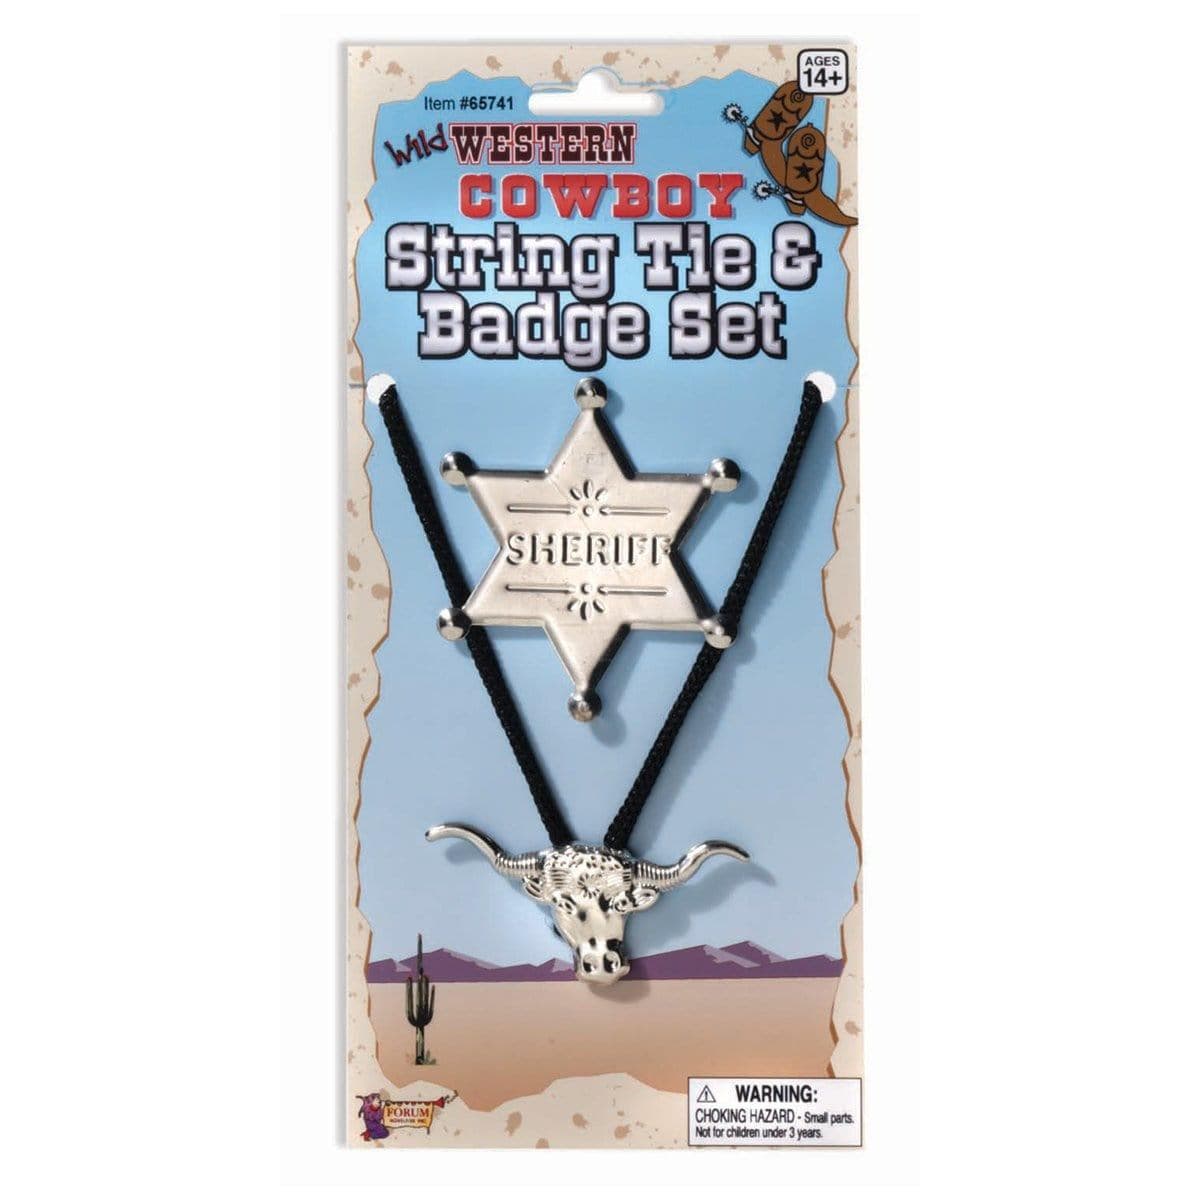 Buy Costume Accessories Cowboy accessory kit for adults sold at Party Expert